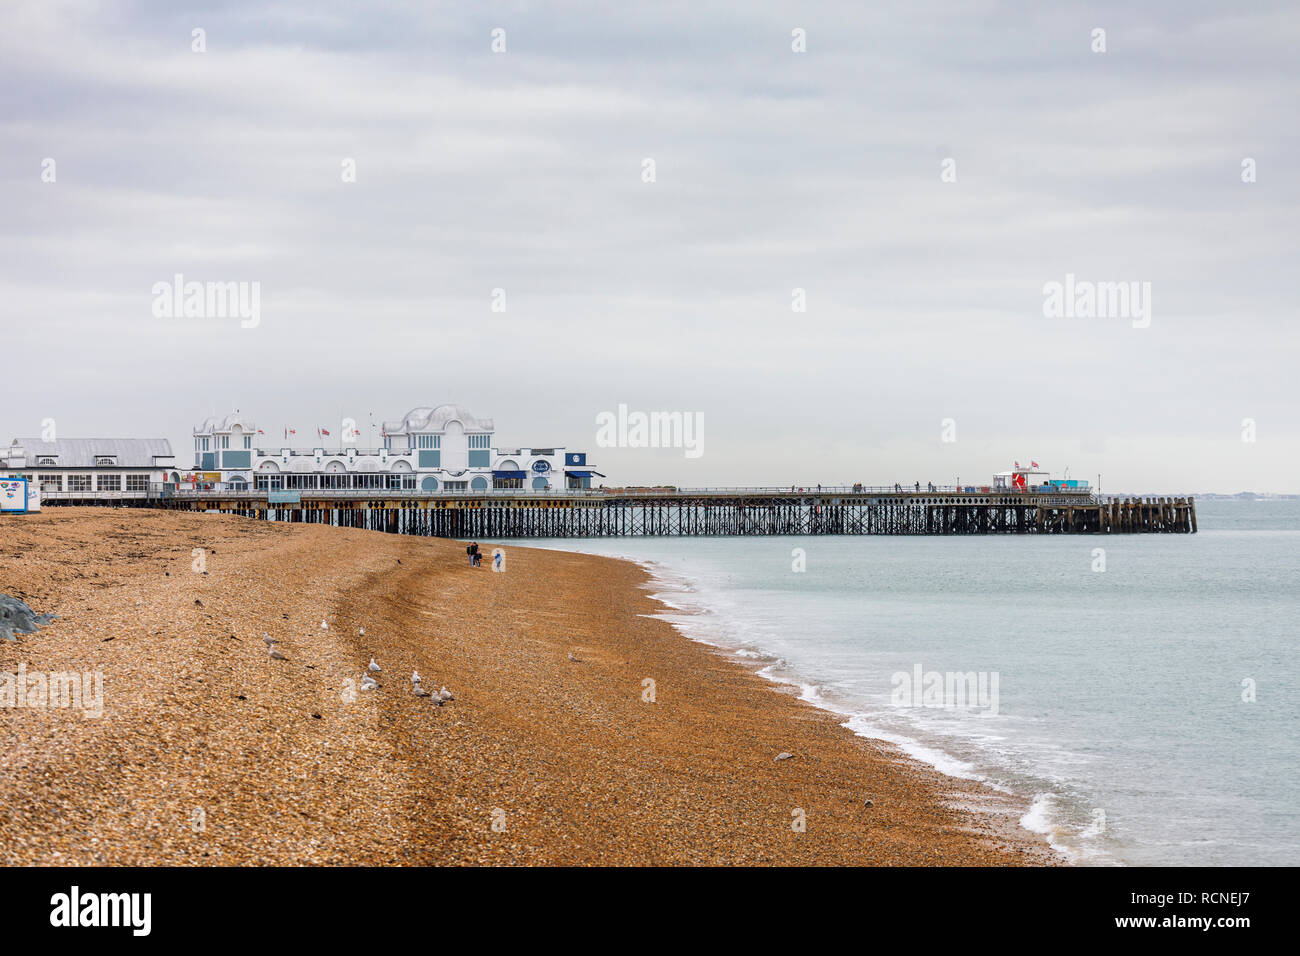 Seafront shoreline view of Victorian South Parade Pier and stony shingle beach, Southsea, Portsmouth, south coast England, UK in low season Stock Photo